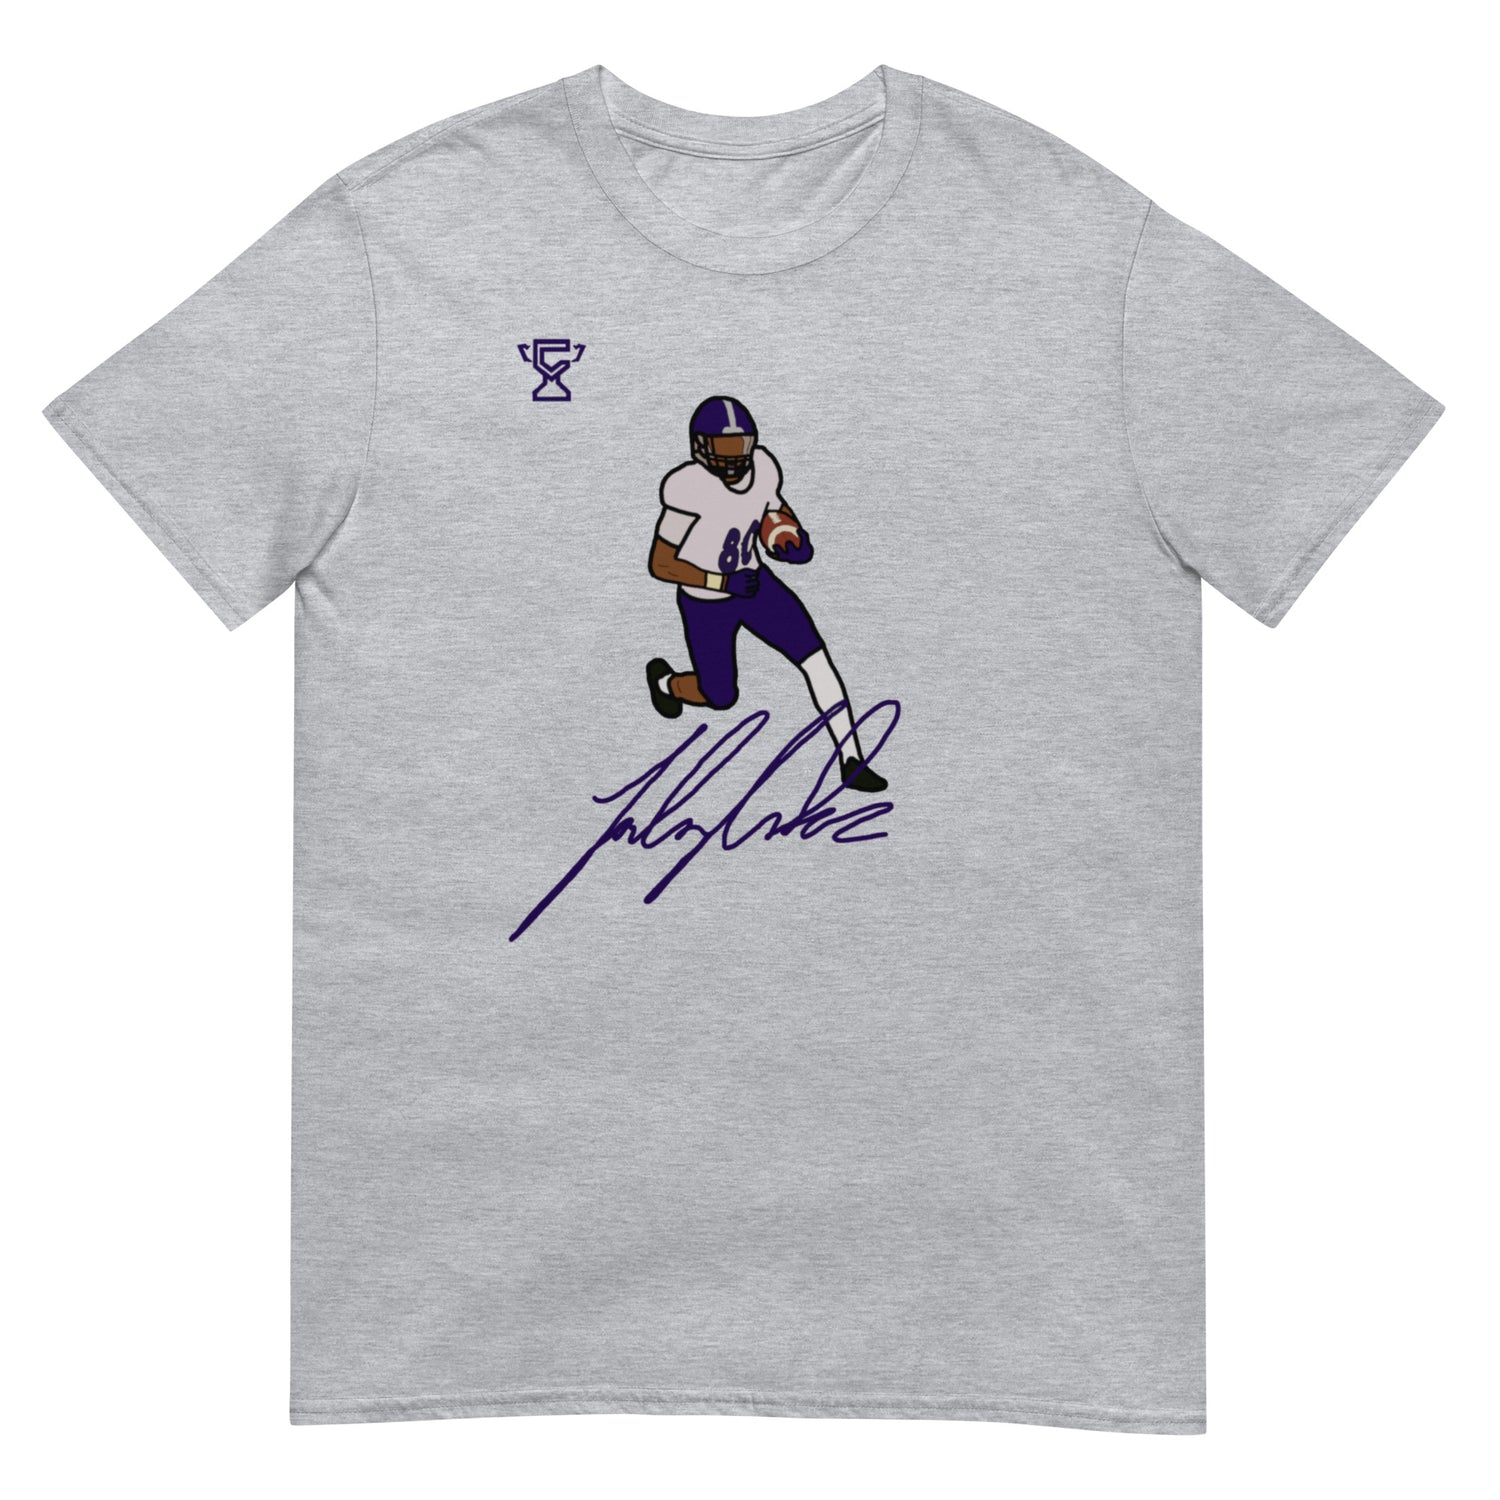 Gray t-shirt with the signature and artwork of Jalen Coker along with the Champletes logo.